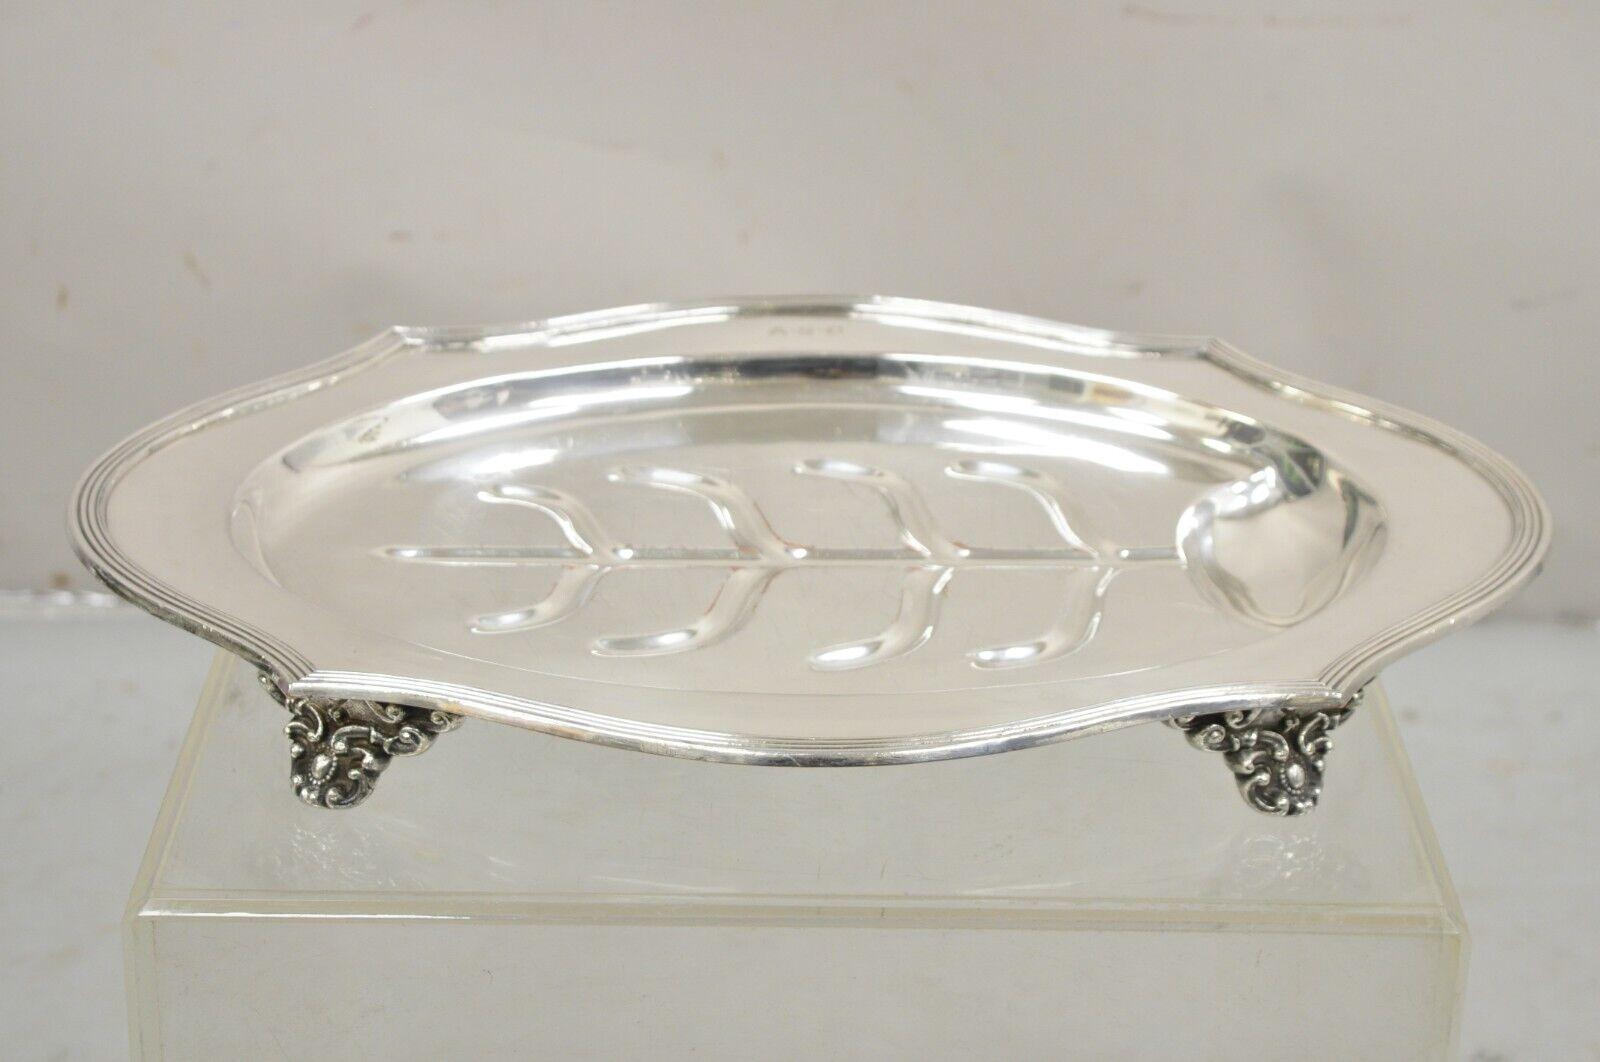 Vintage English Sheffield Meat Cutlery Footed Serving Platter Tray with 